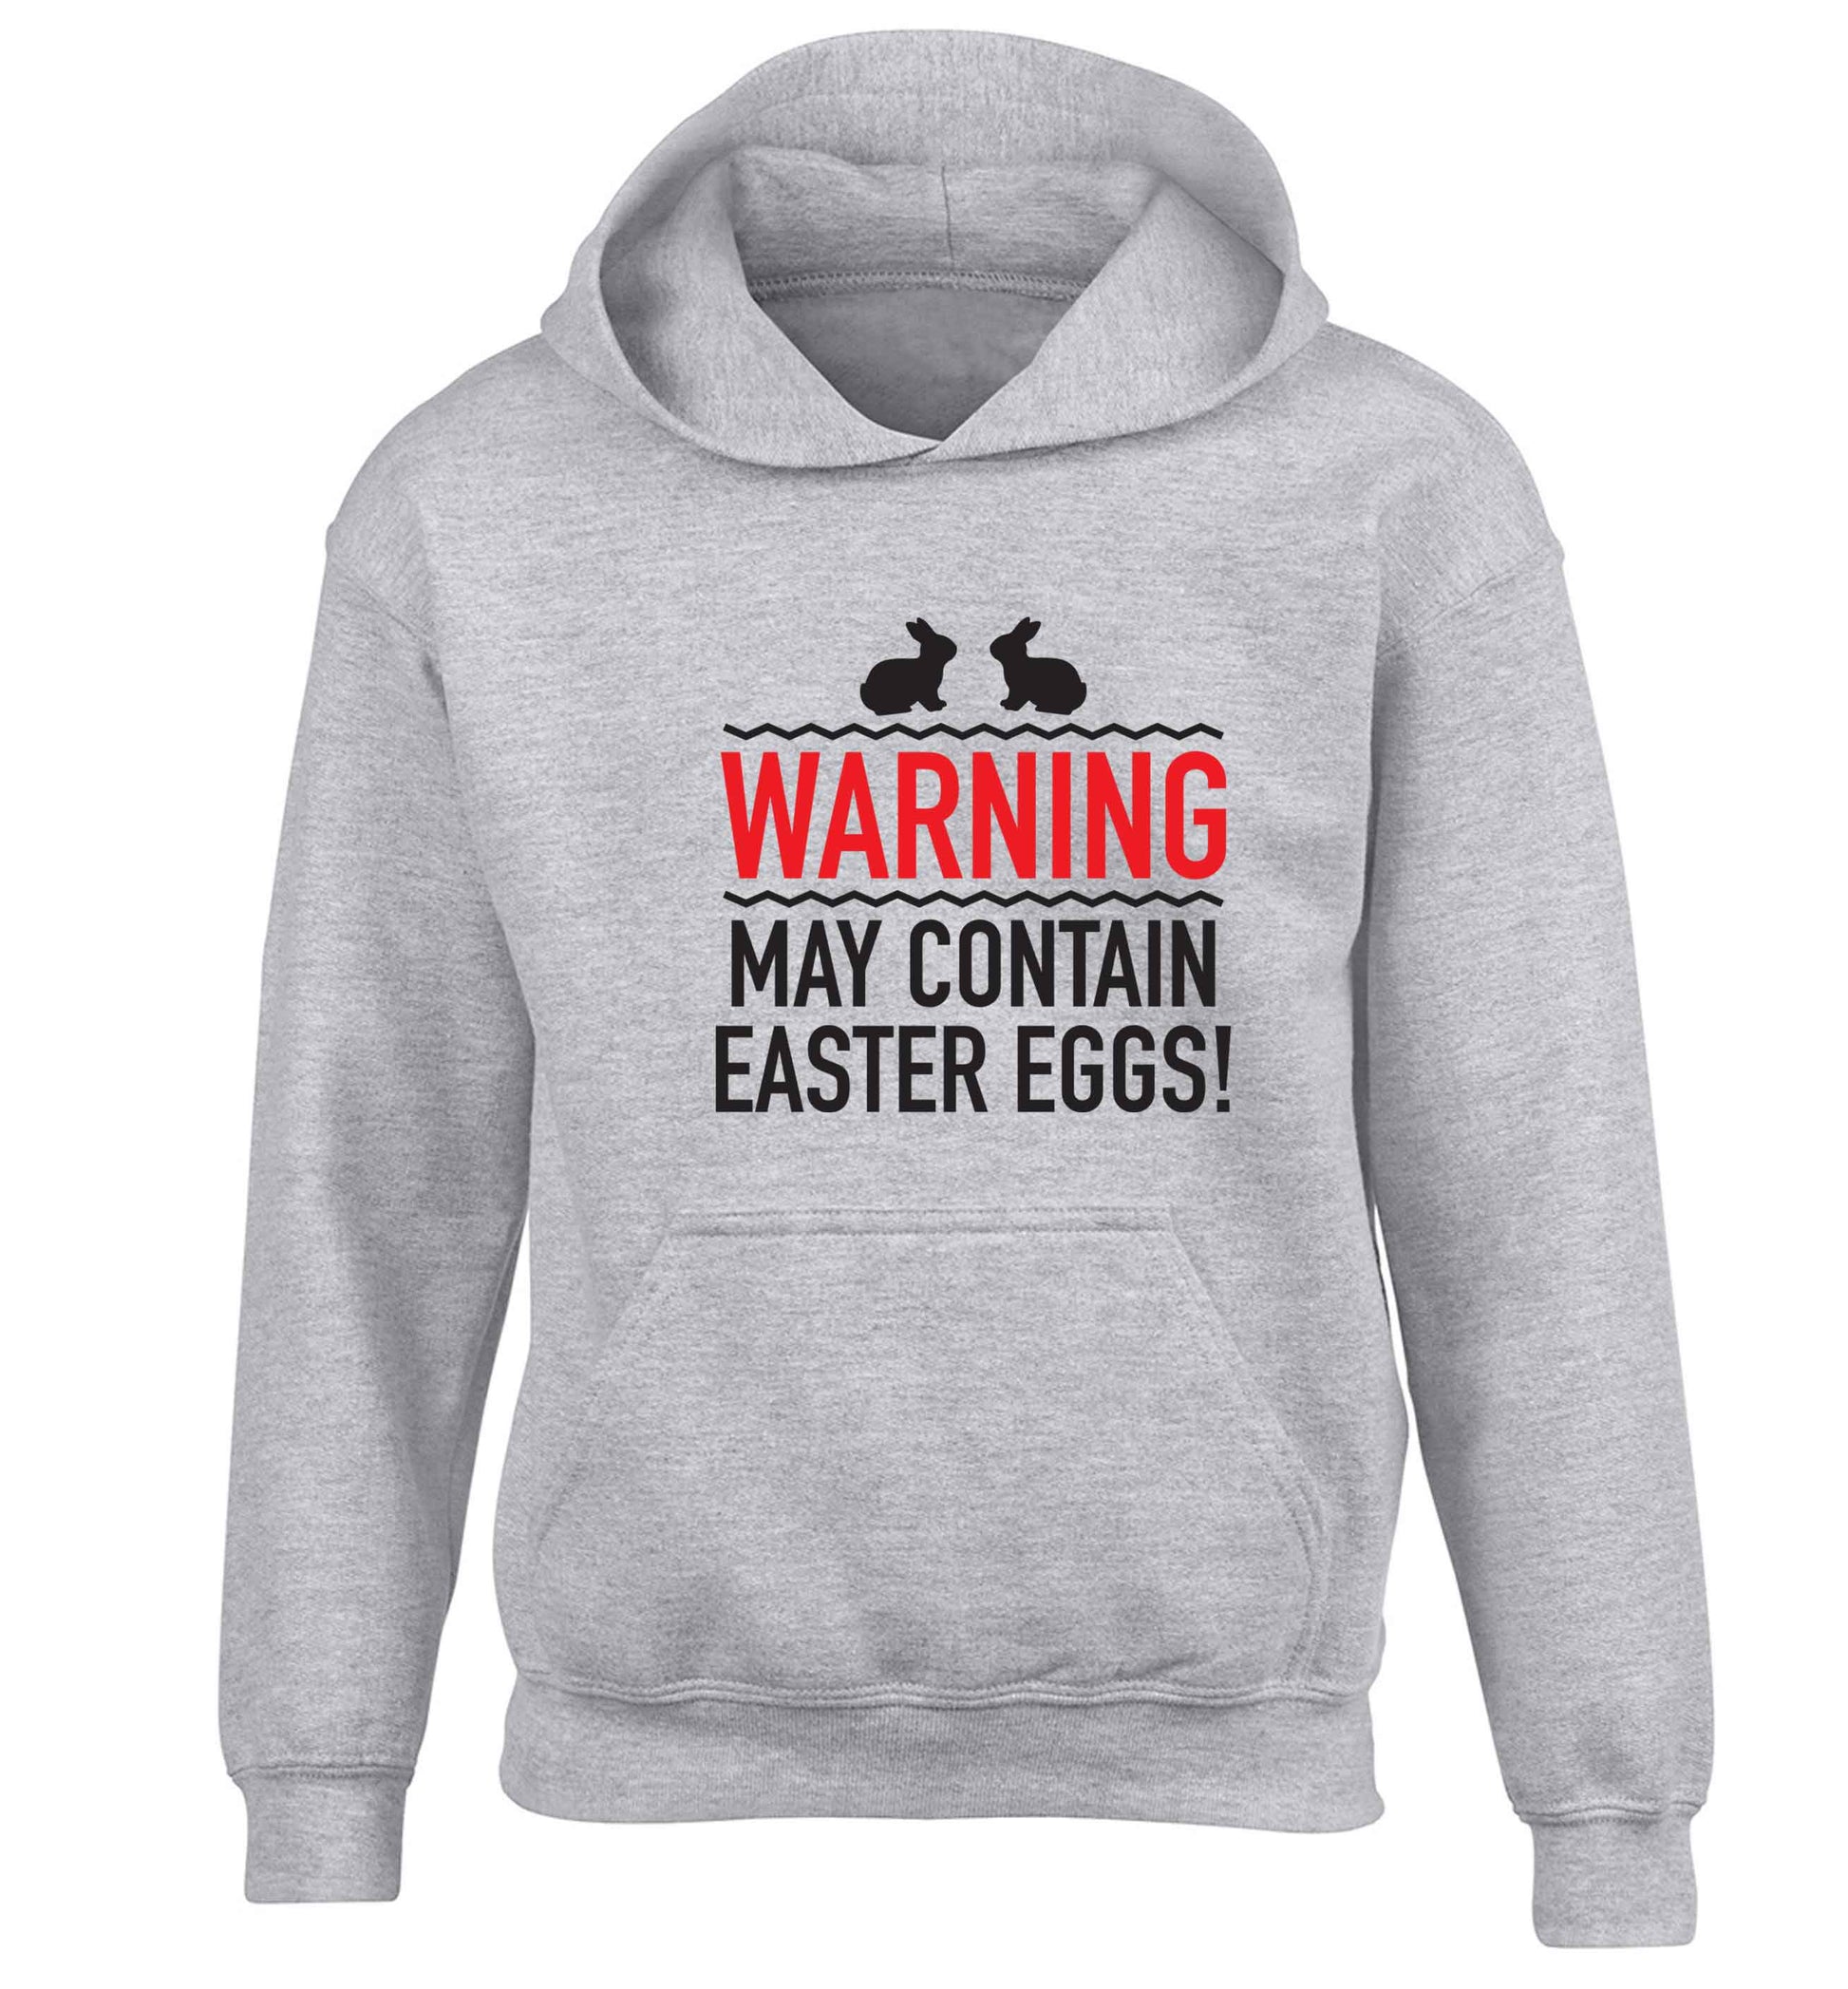 Warning may contain Easter eggs children's grey hoodie 12-13 Years